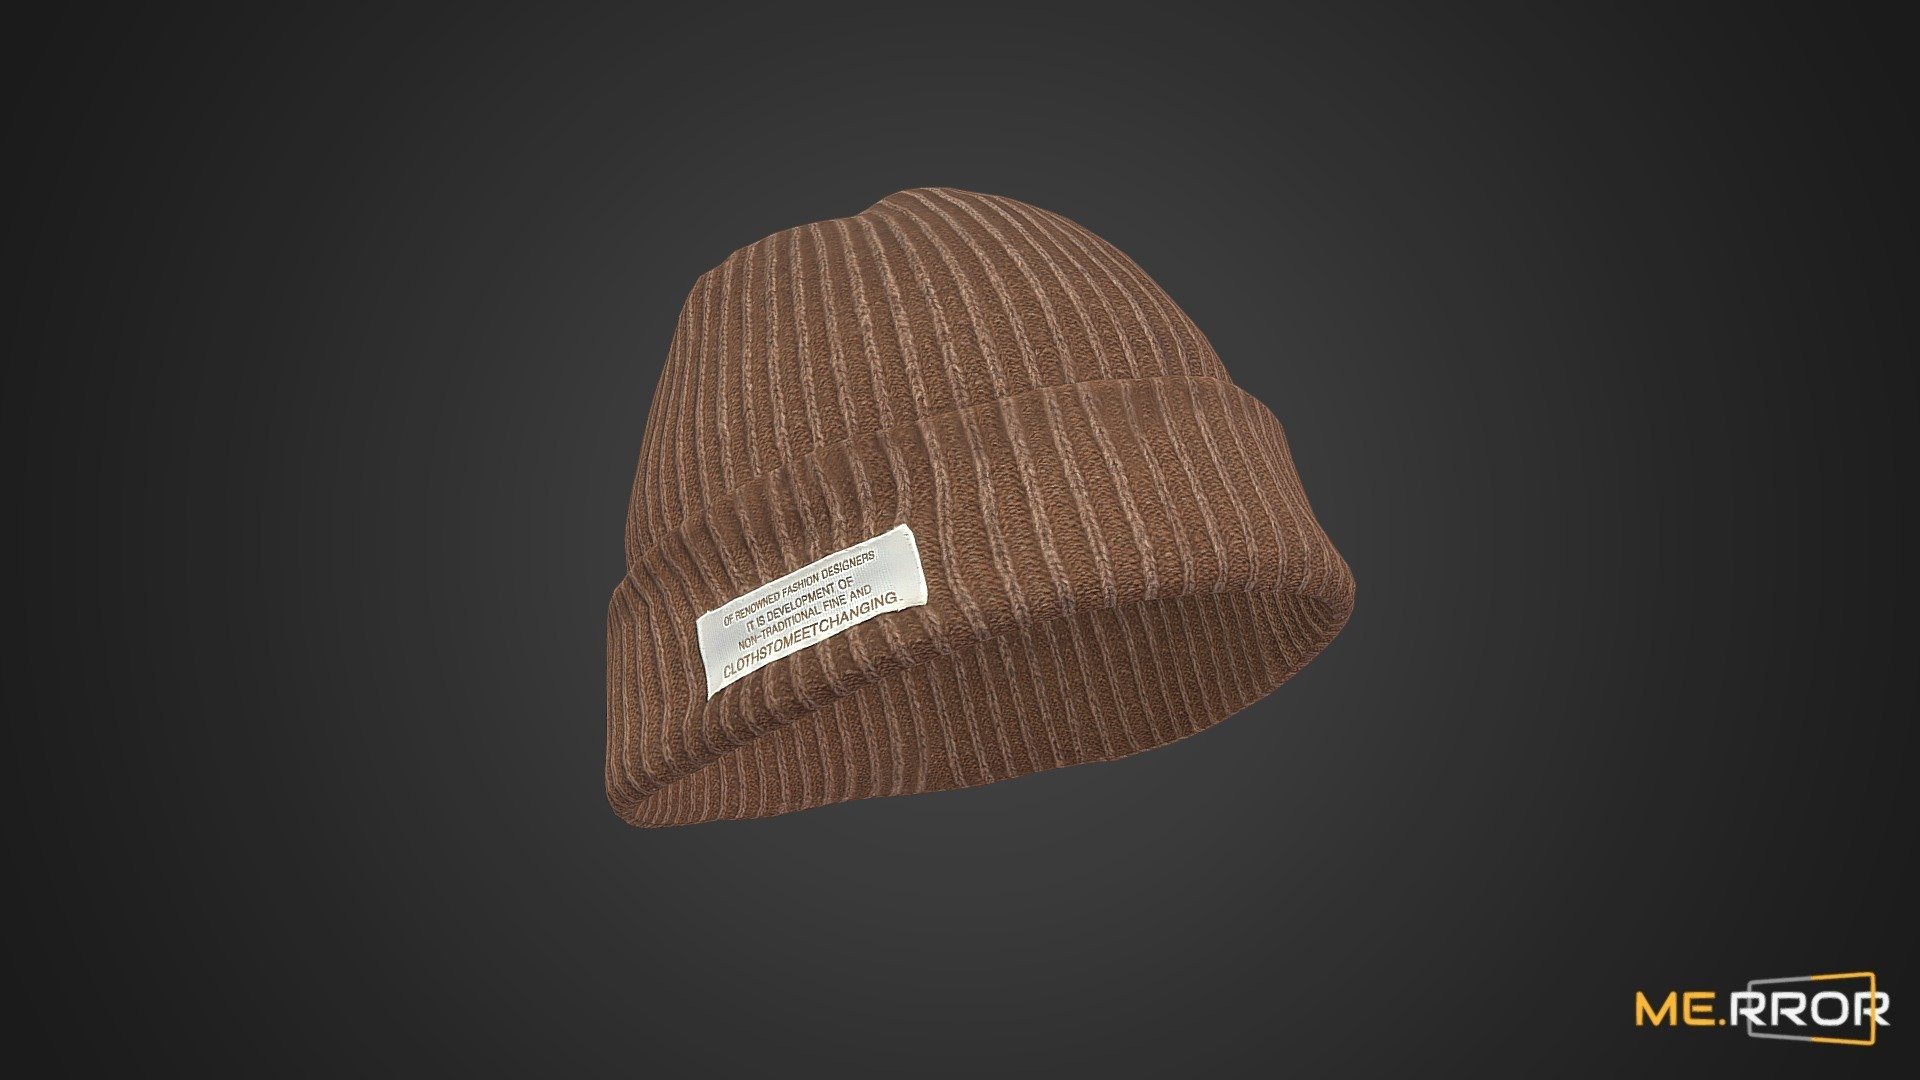 MERROR is a 3D Content PLATFORM which introduces various Asian assets to the 3D world


3DScanning #Photogrametry #ME.RROR - [Game-Ready] Brown Beanie - Buy Royalty Free 3D model by ME.RROR (@merror) 3d model